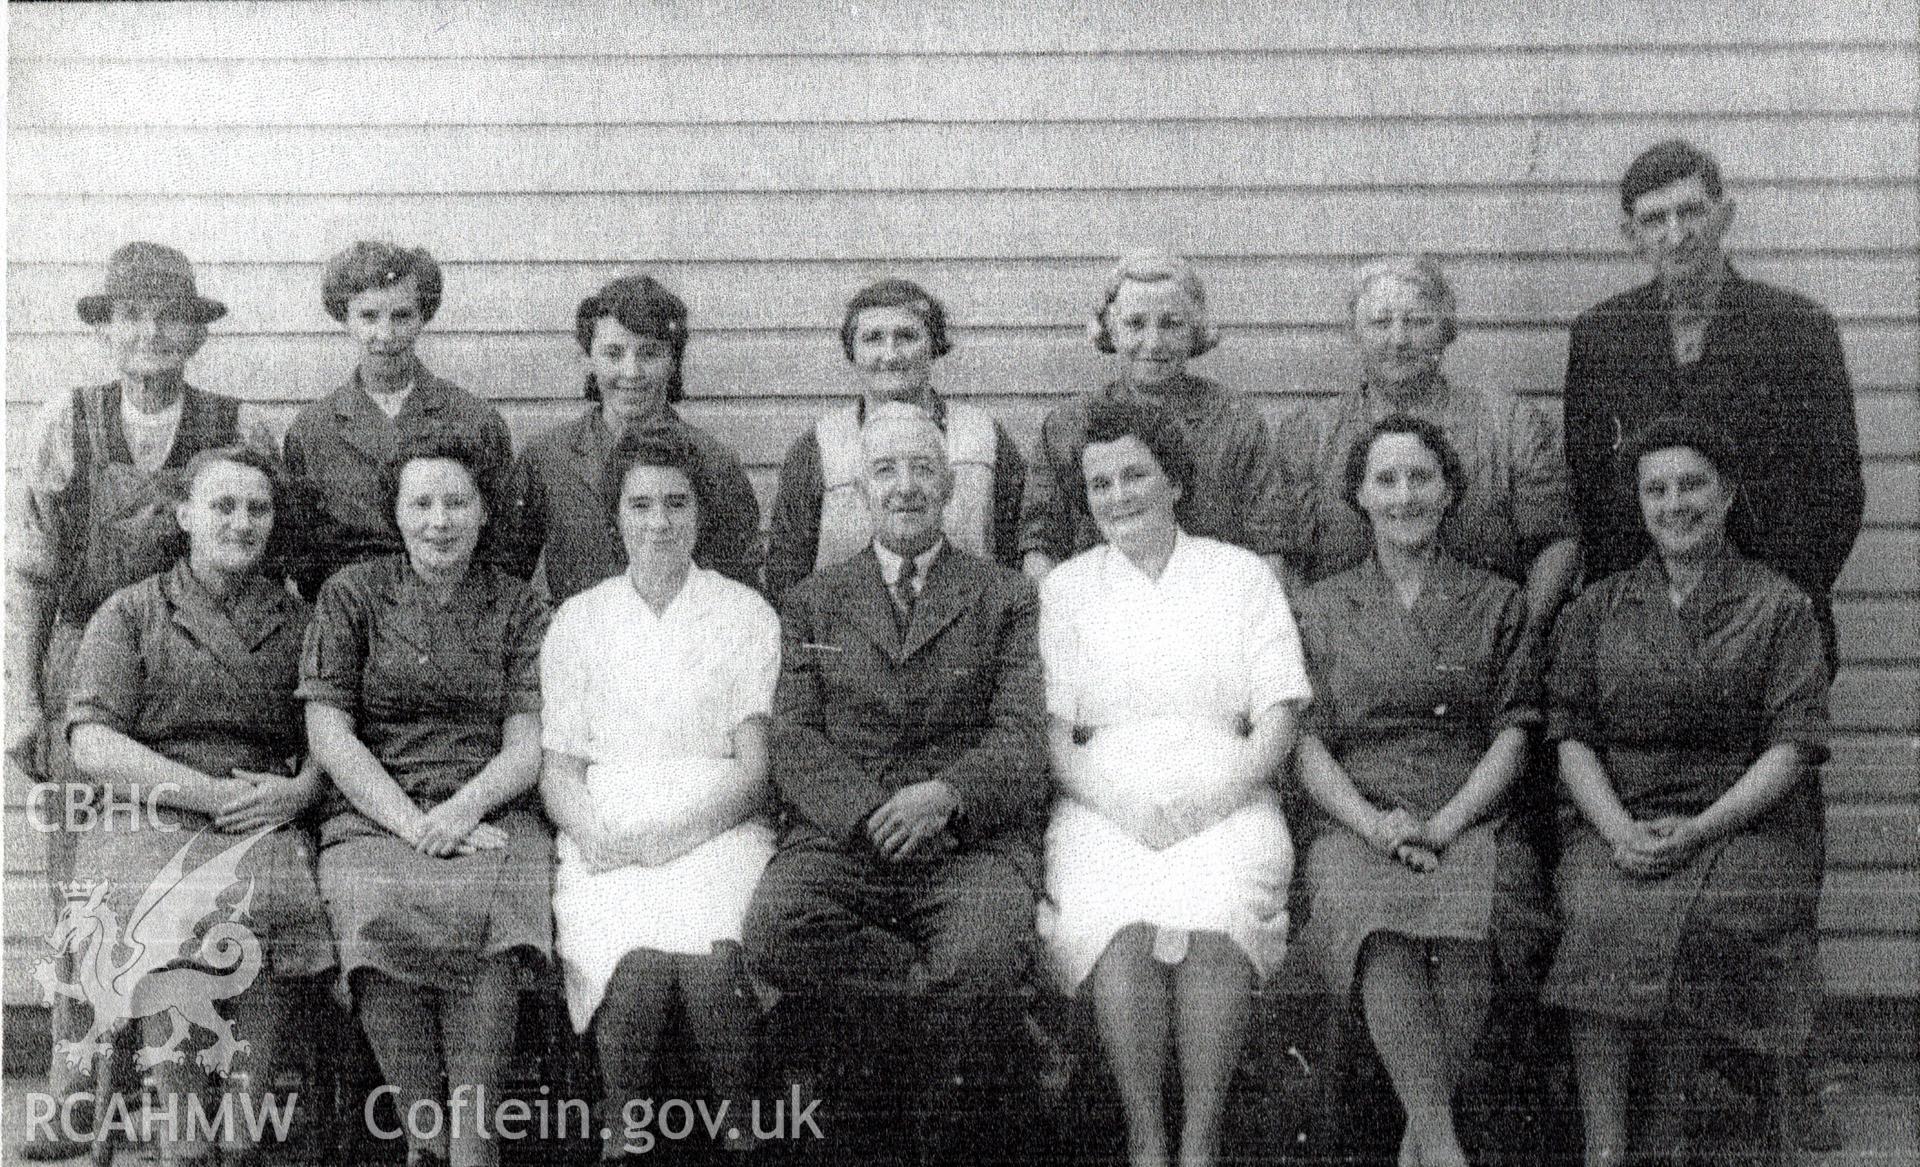 Black and white photograph of members of Bethania Chapel's congregation. Donated to the RCAHMW by Cyril Philips as part of the Digital Dissent Project.